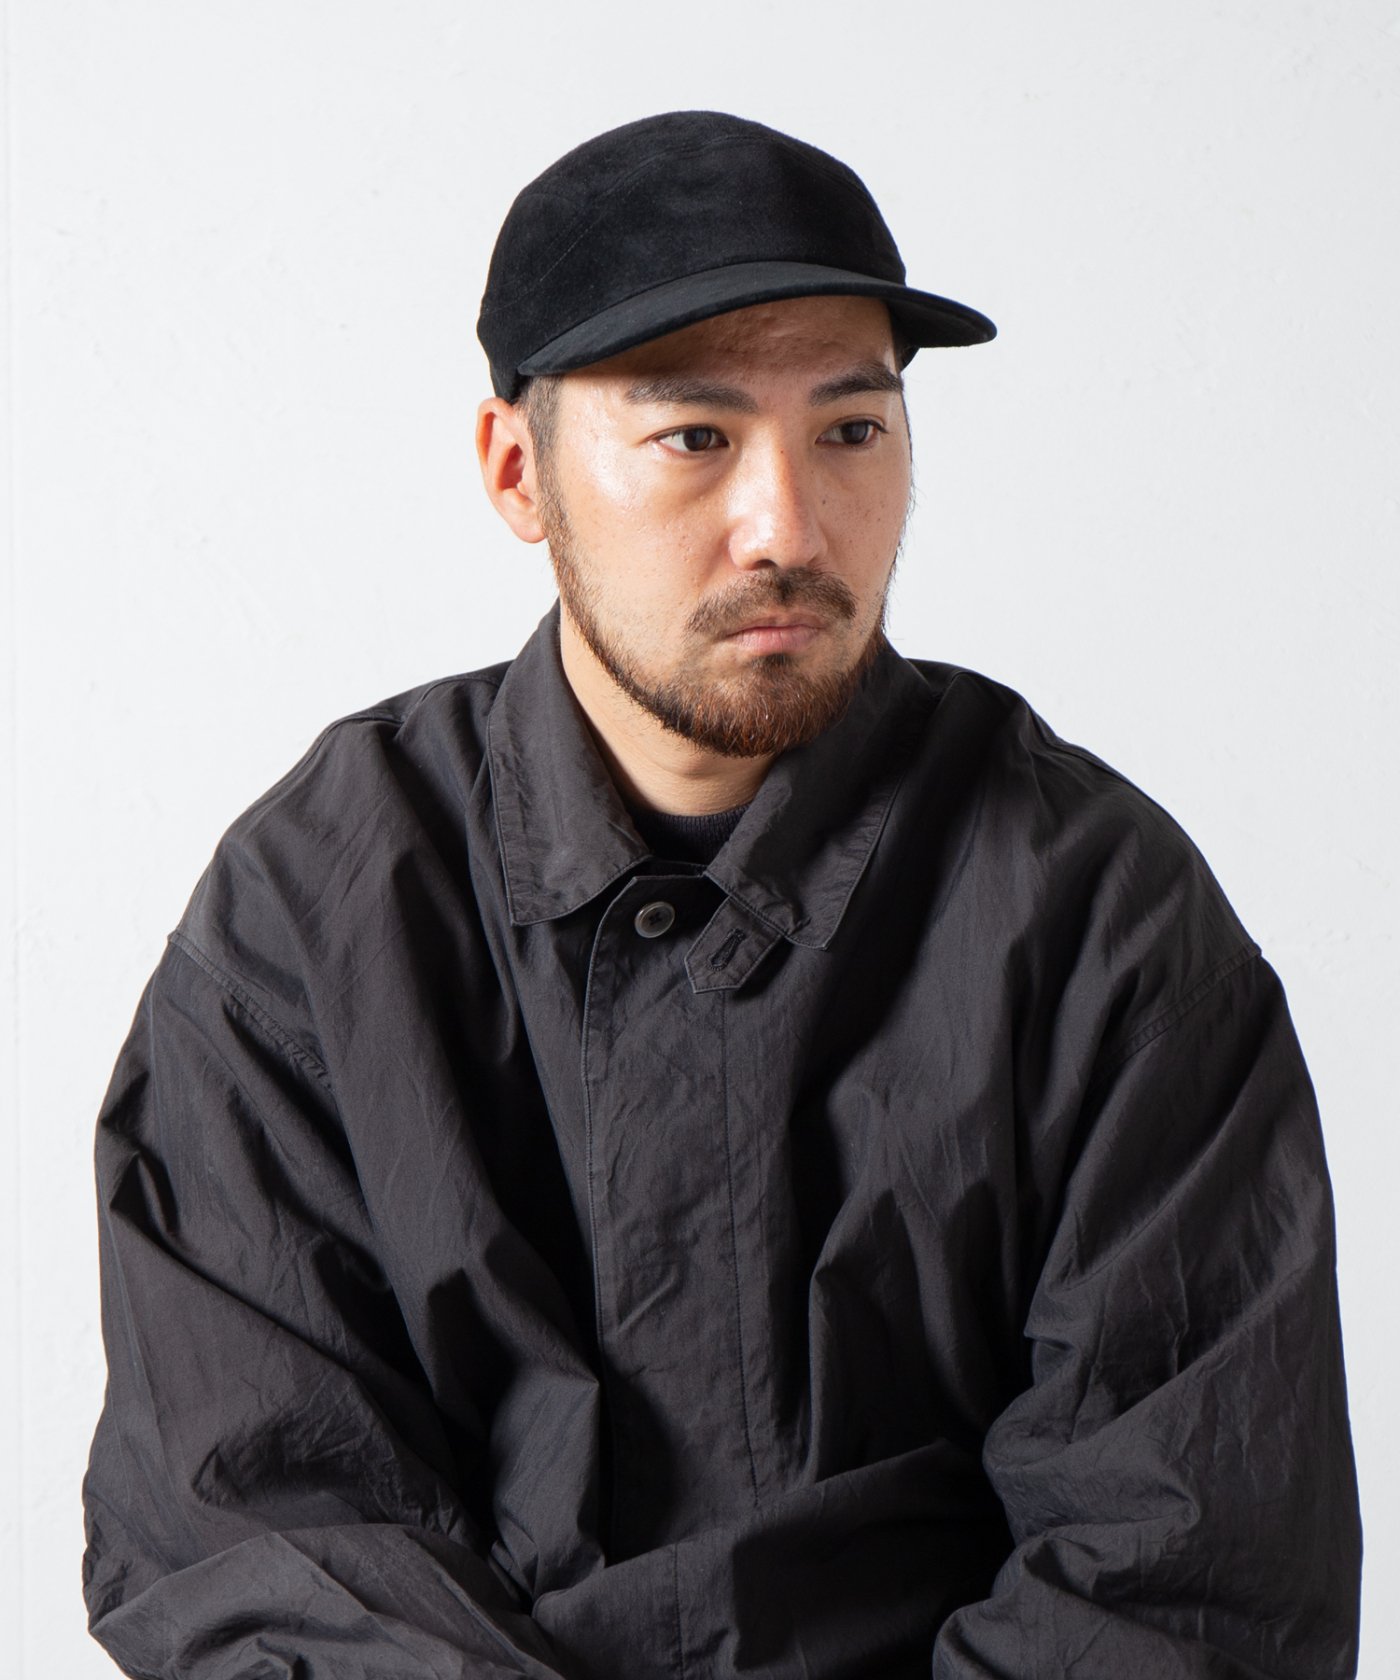 Indietro Association Leather Jet Cap 061 レザージェットキャップ